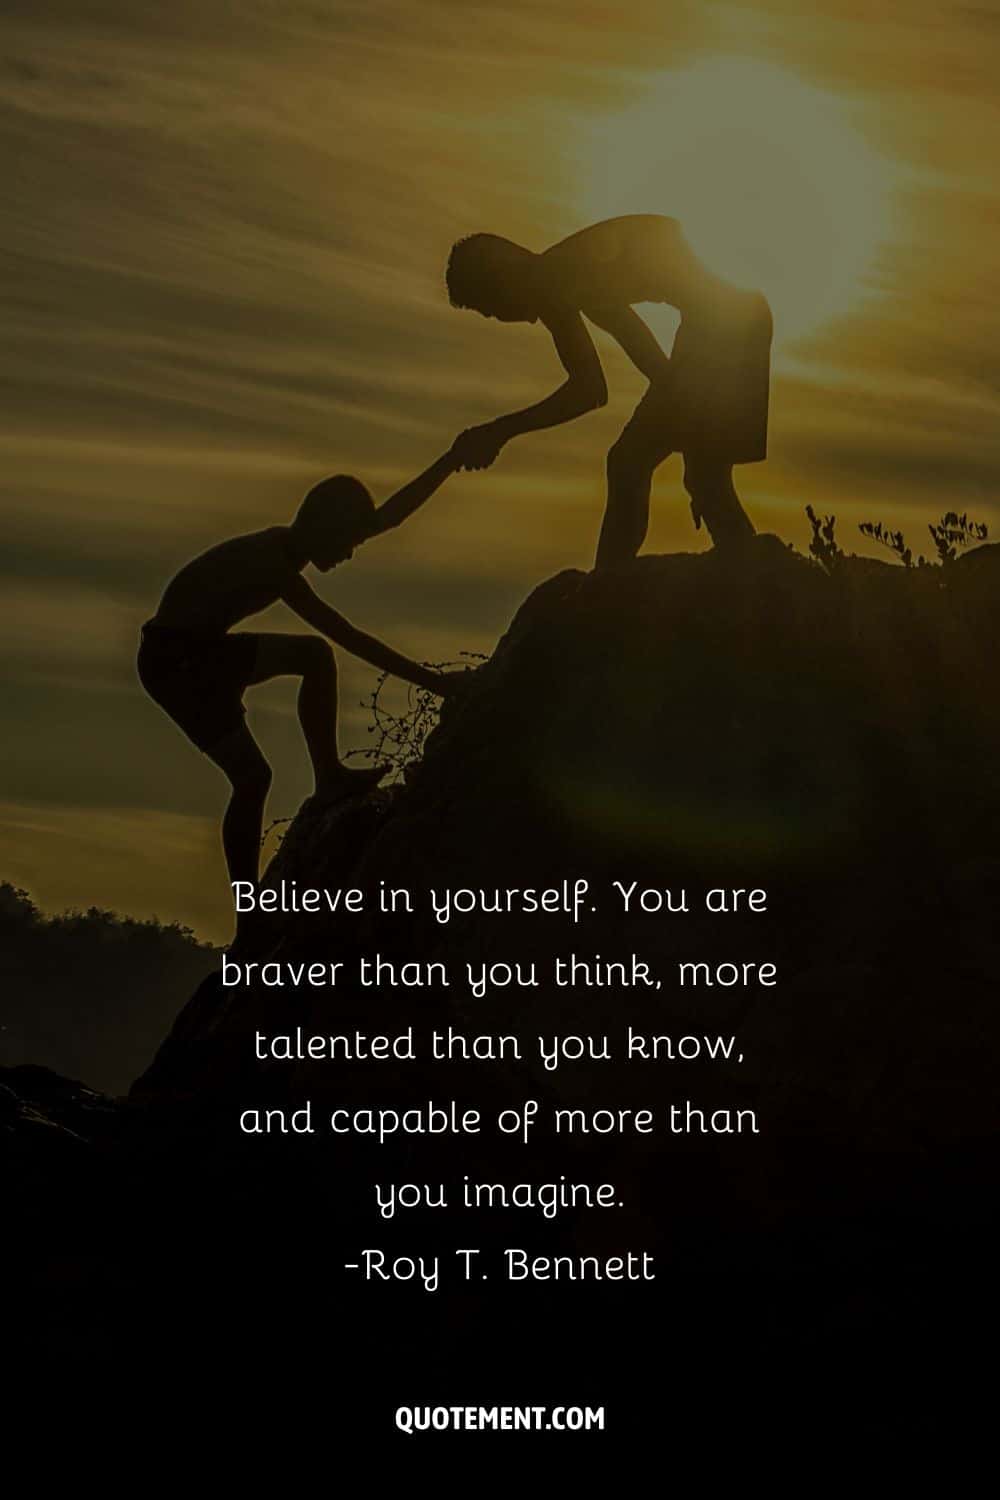 image of kids climbing representing empowering always believe in yourself quote